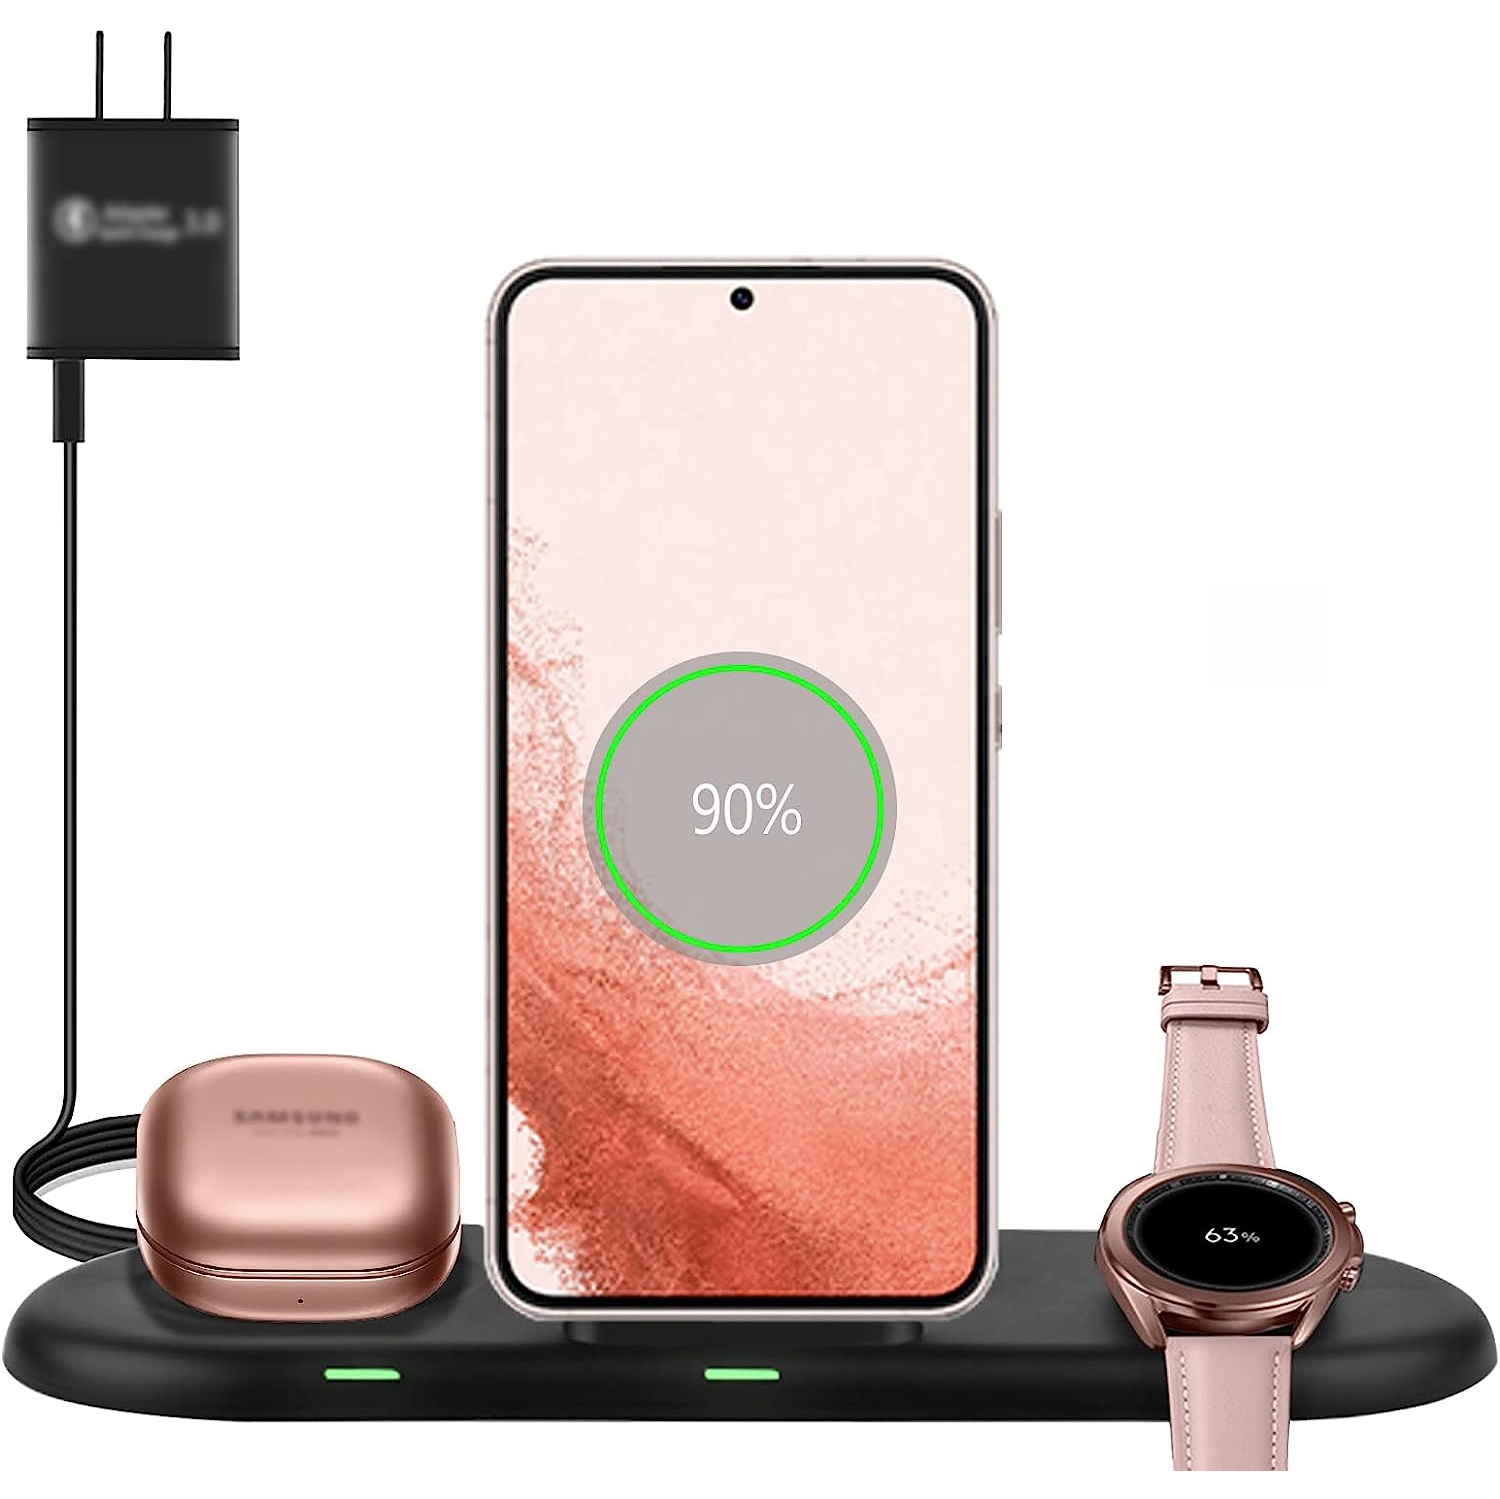 Wireless Charging Station 3 in 1, Fast Wireless Charger for Samsung Galaxy Watch 4, Active 2 Series and Galaxy Buds Series, Phone Charger Stand Dock for Samsung Galaxy S21 S10 Note